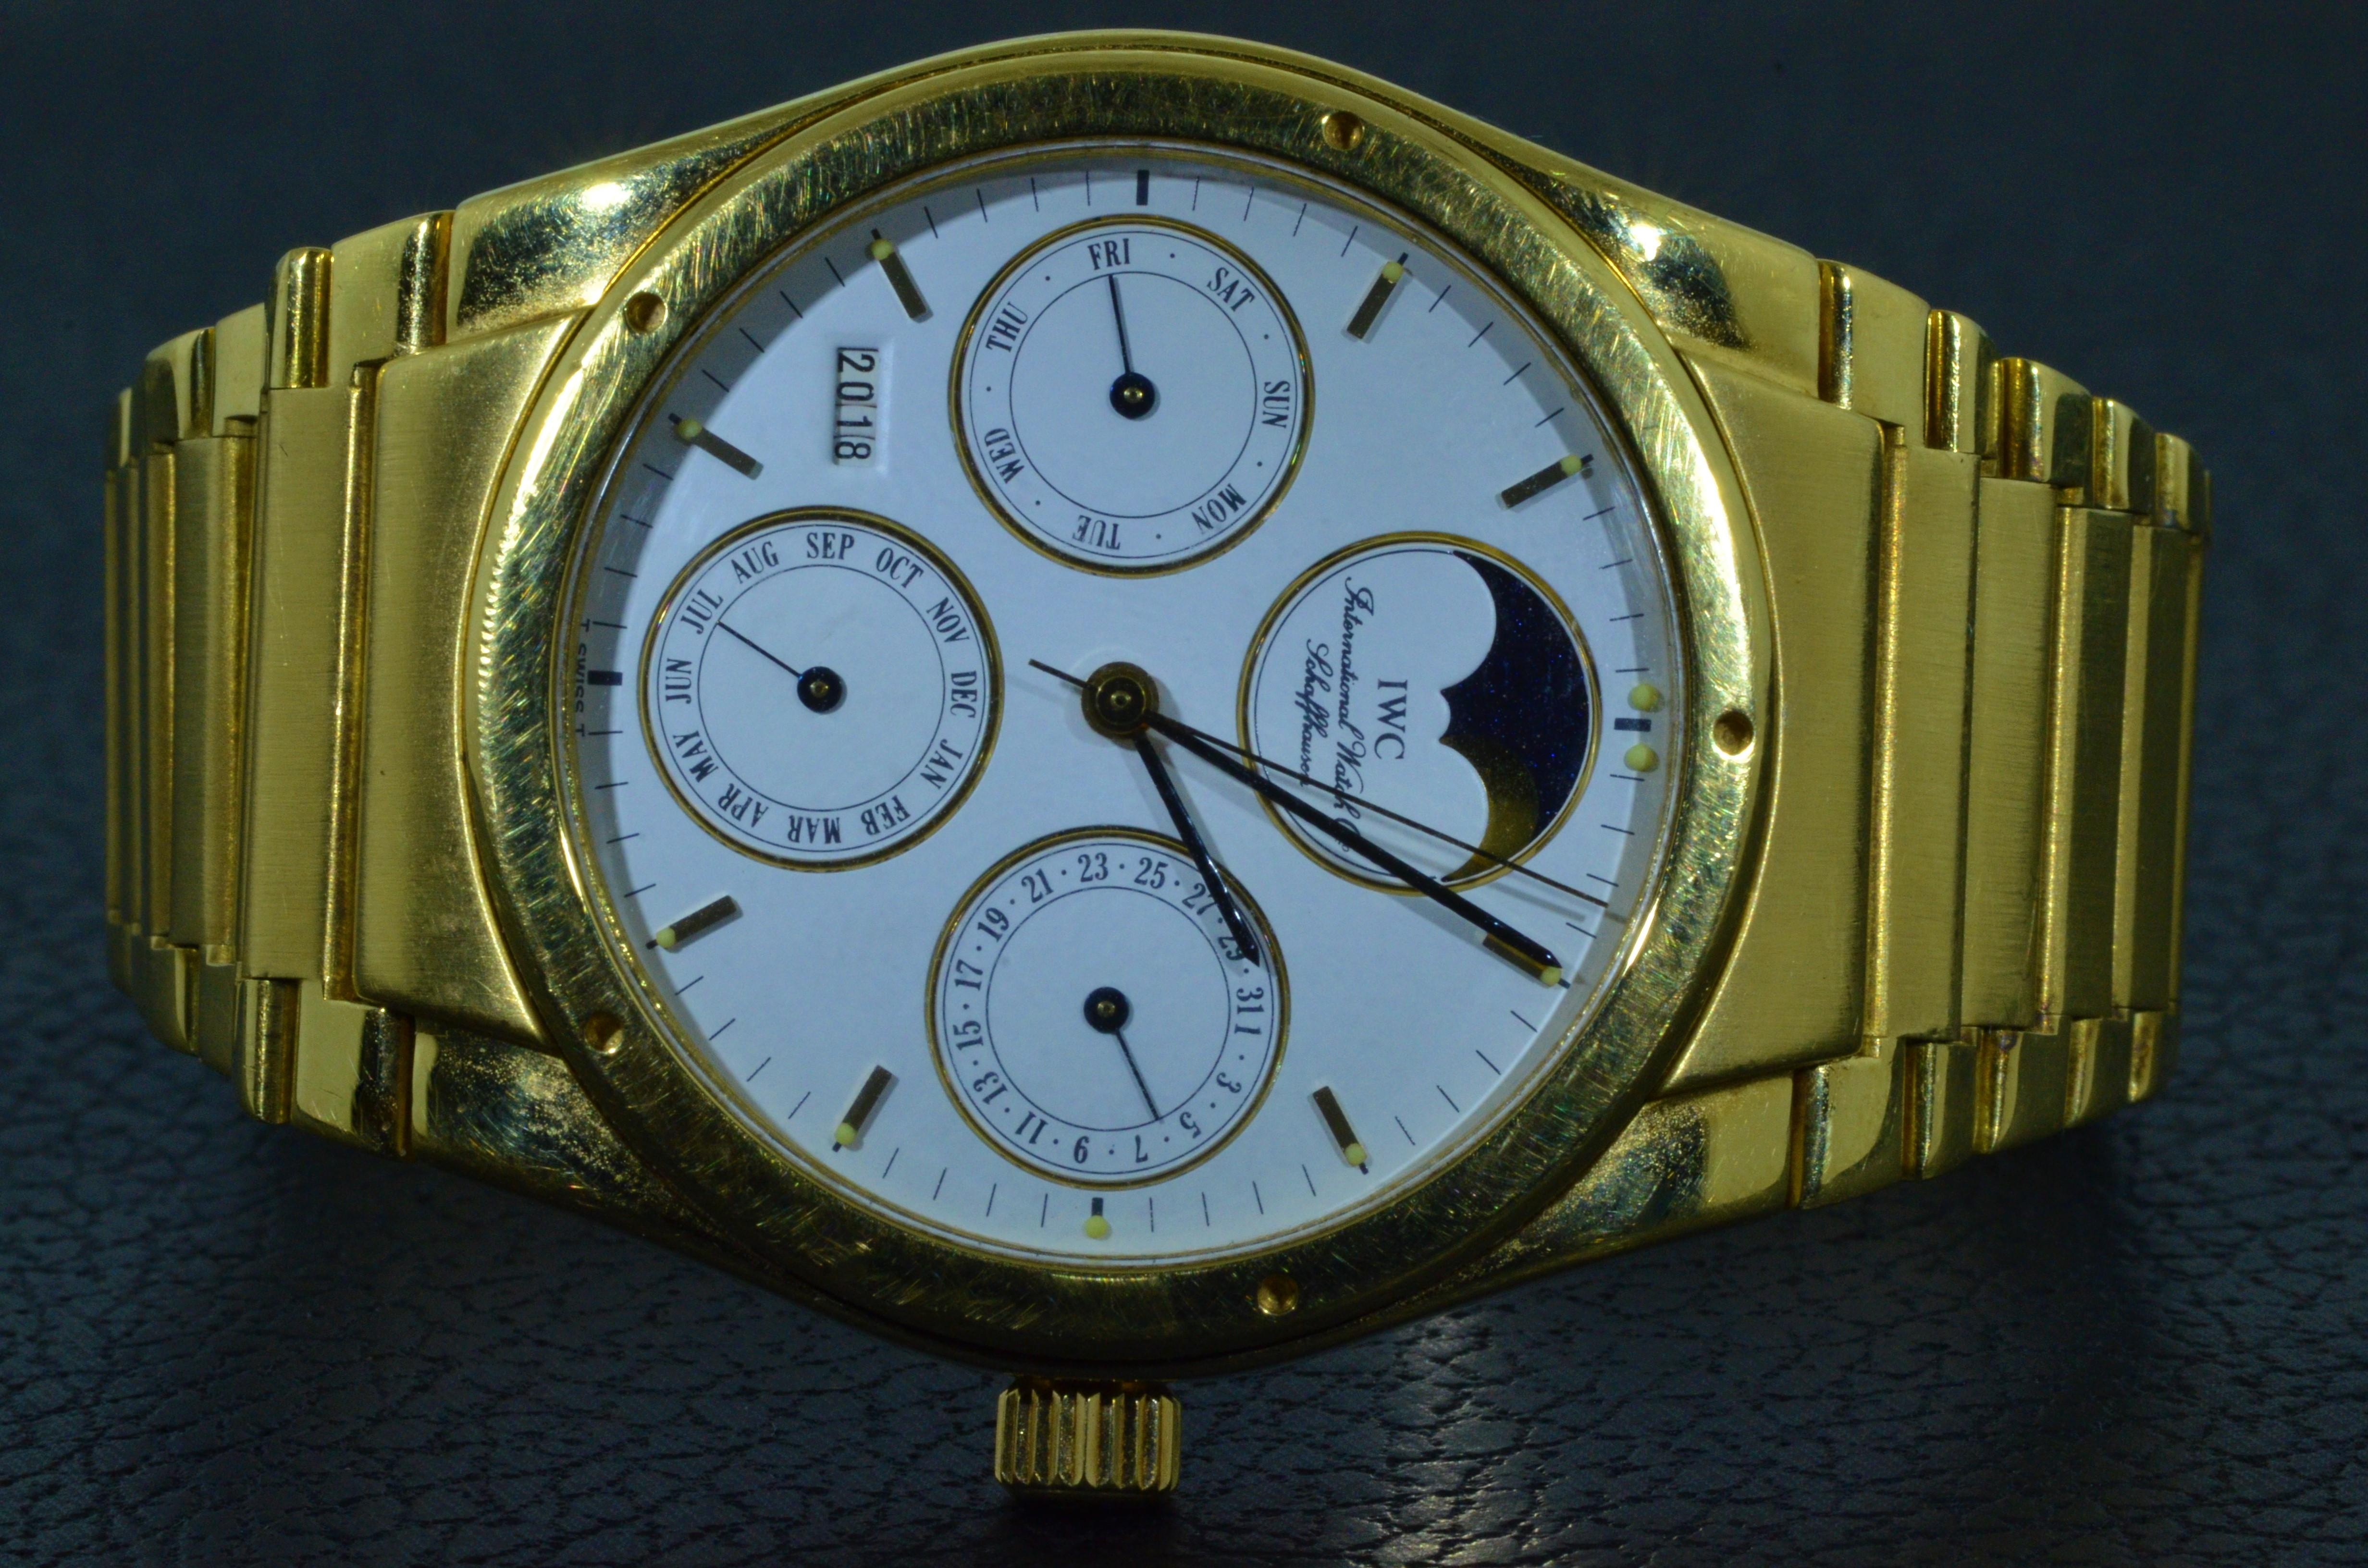 A Fine 18k Gold Automatic Perpetual Calendar Wristwatch with Moon Phases and Bracelet
Signed IWC, Schaffhausen, Ingenieur, Perpetual
Automatic jeweled movement, white dial, applied baton numerals with luminous tips, luminous hands, three subsidiary